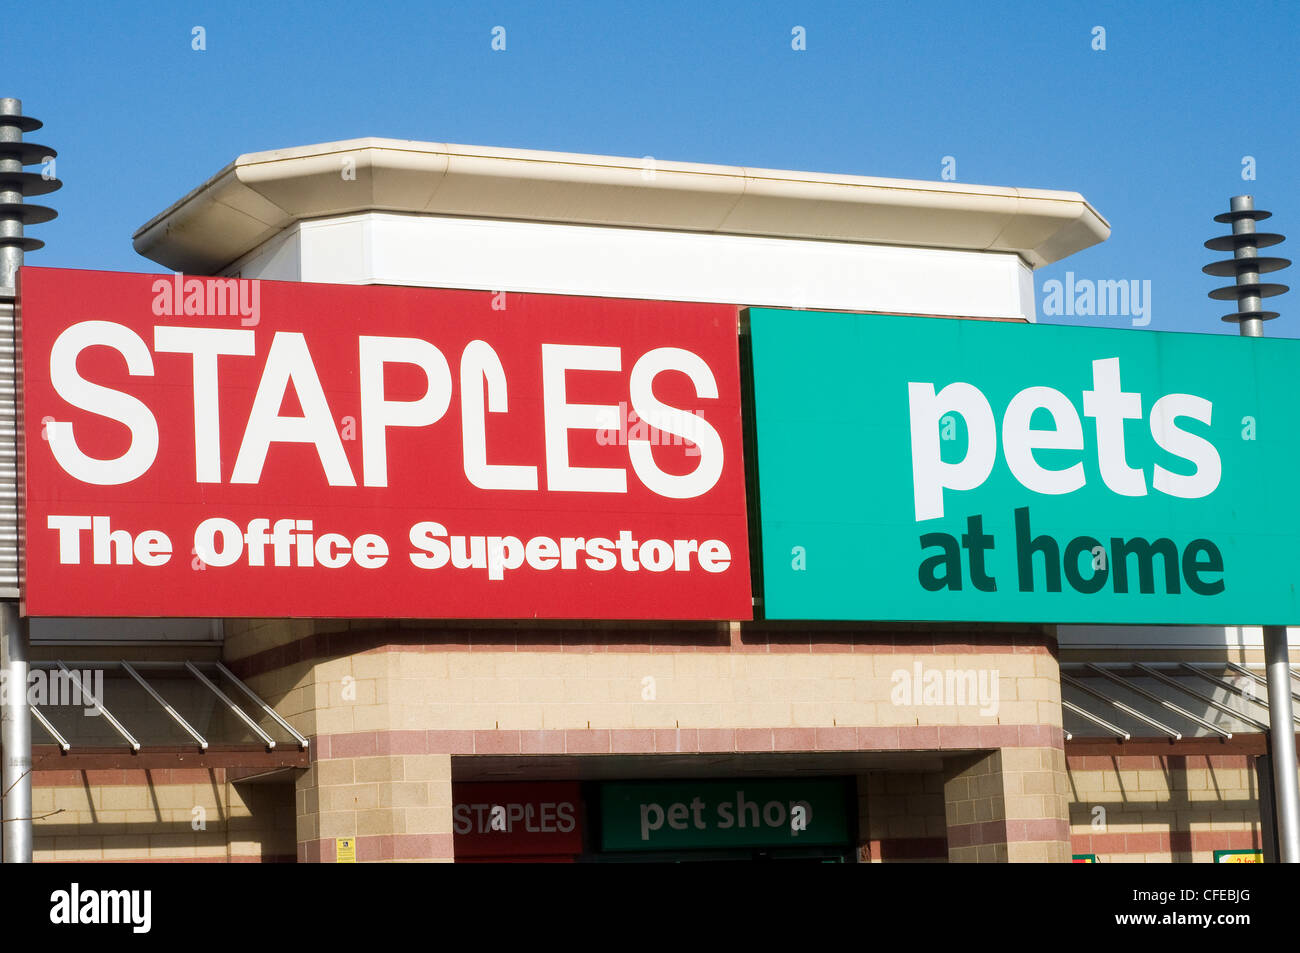 staples the office superstore,pets at home Stock Photo